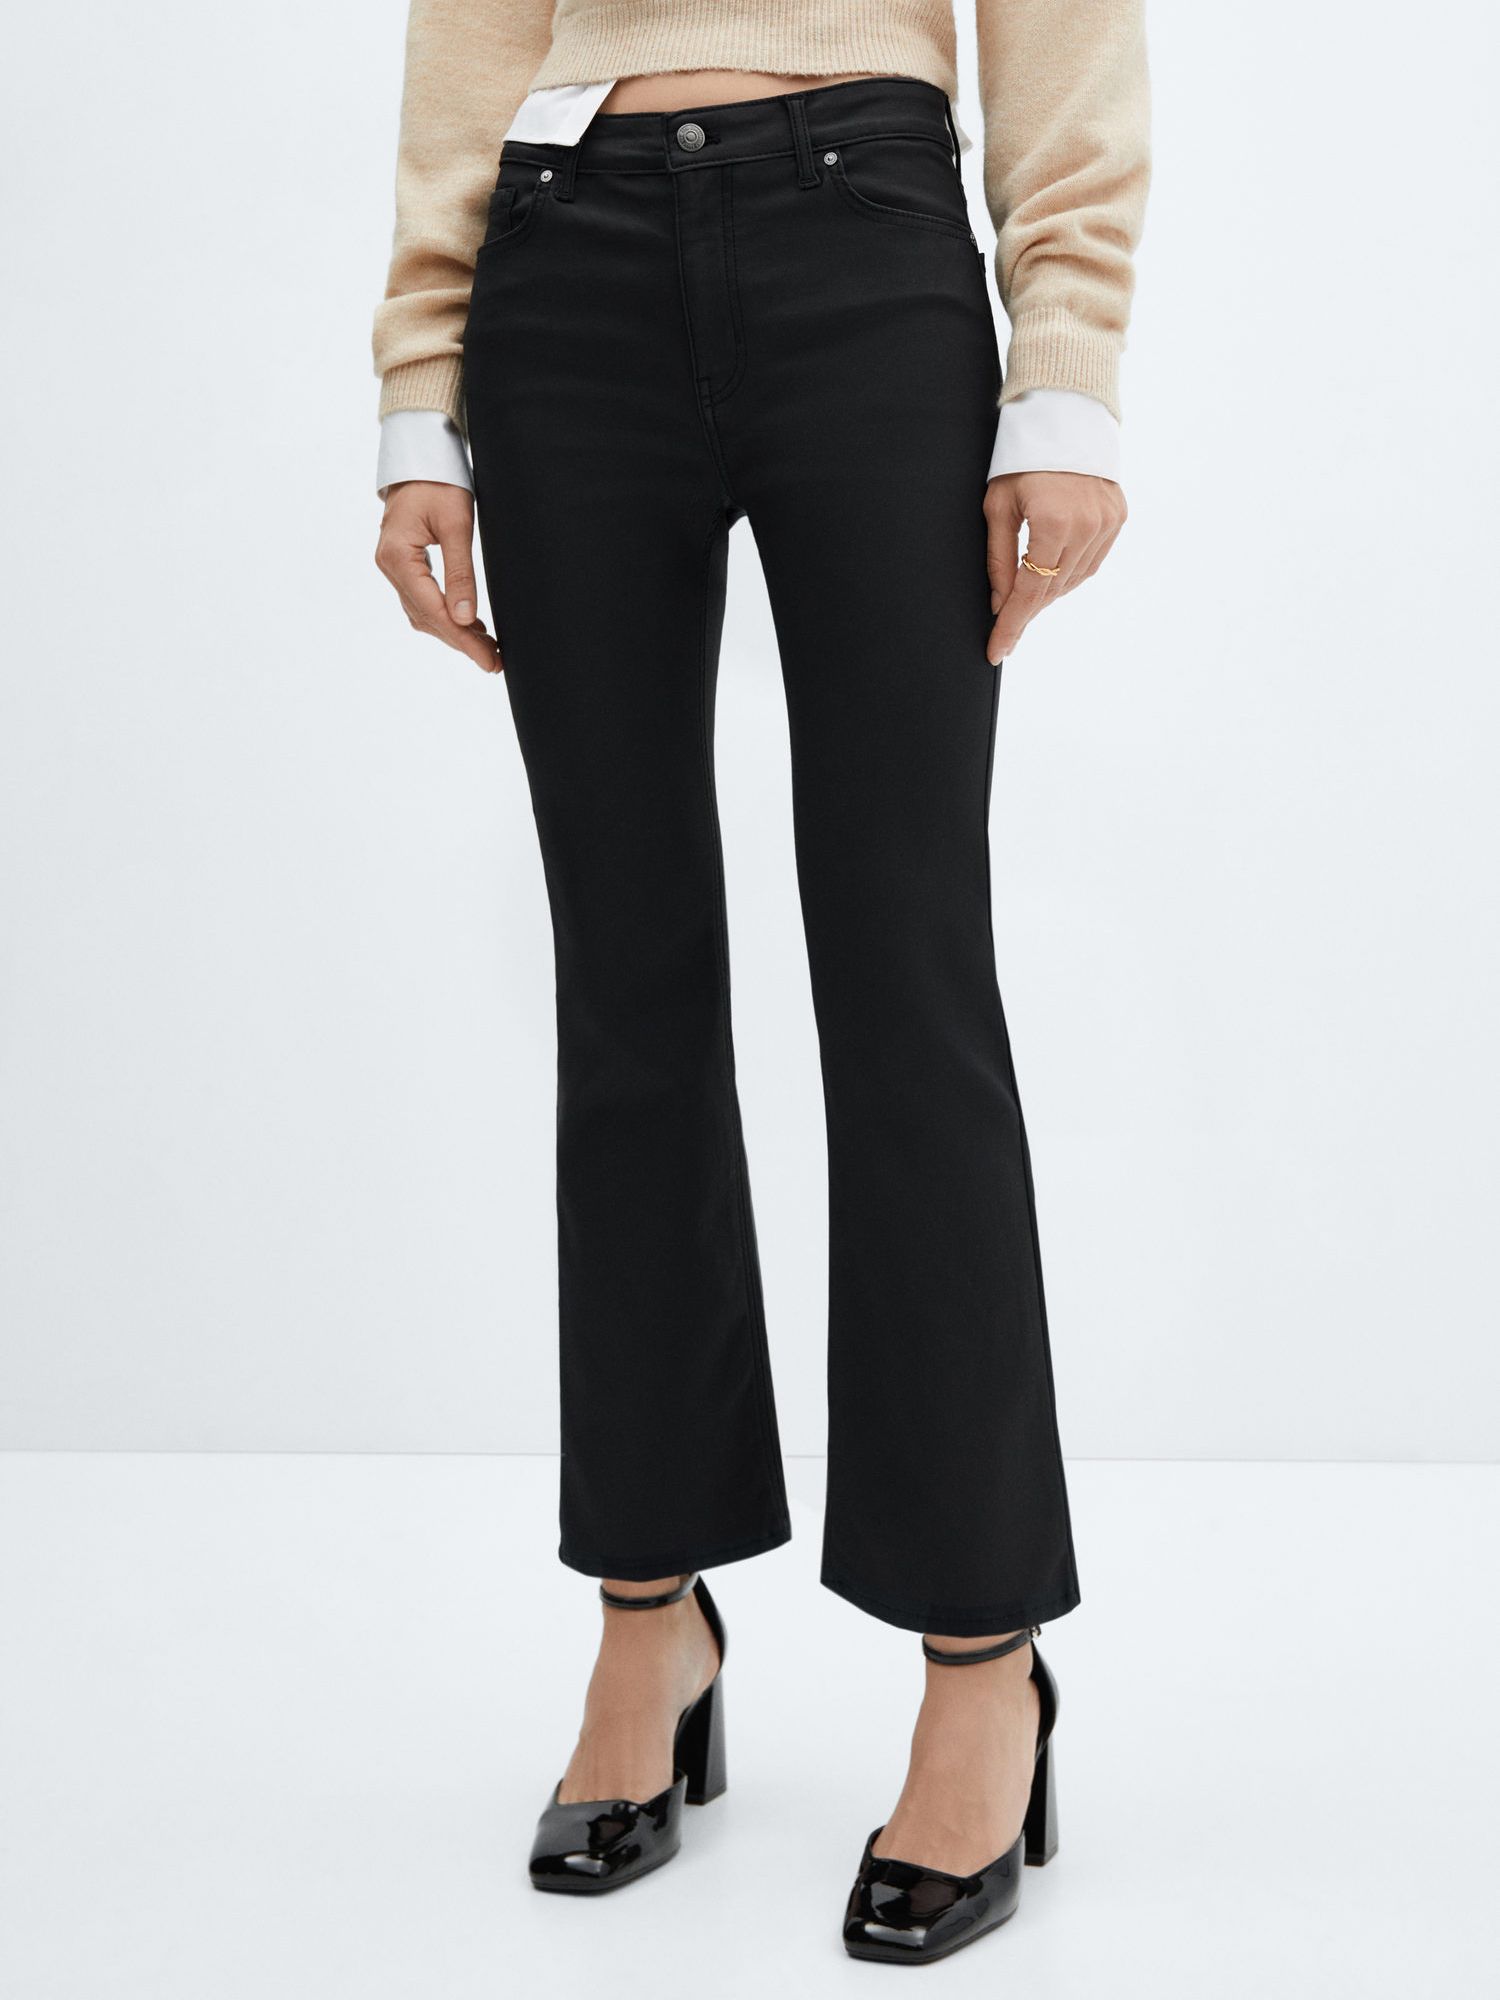 Mango Sienna Waxed Flared Cropped Jeans, Black at John Lewis & Partners